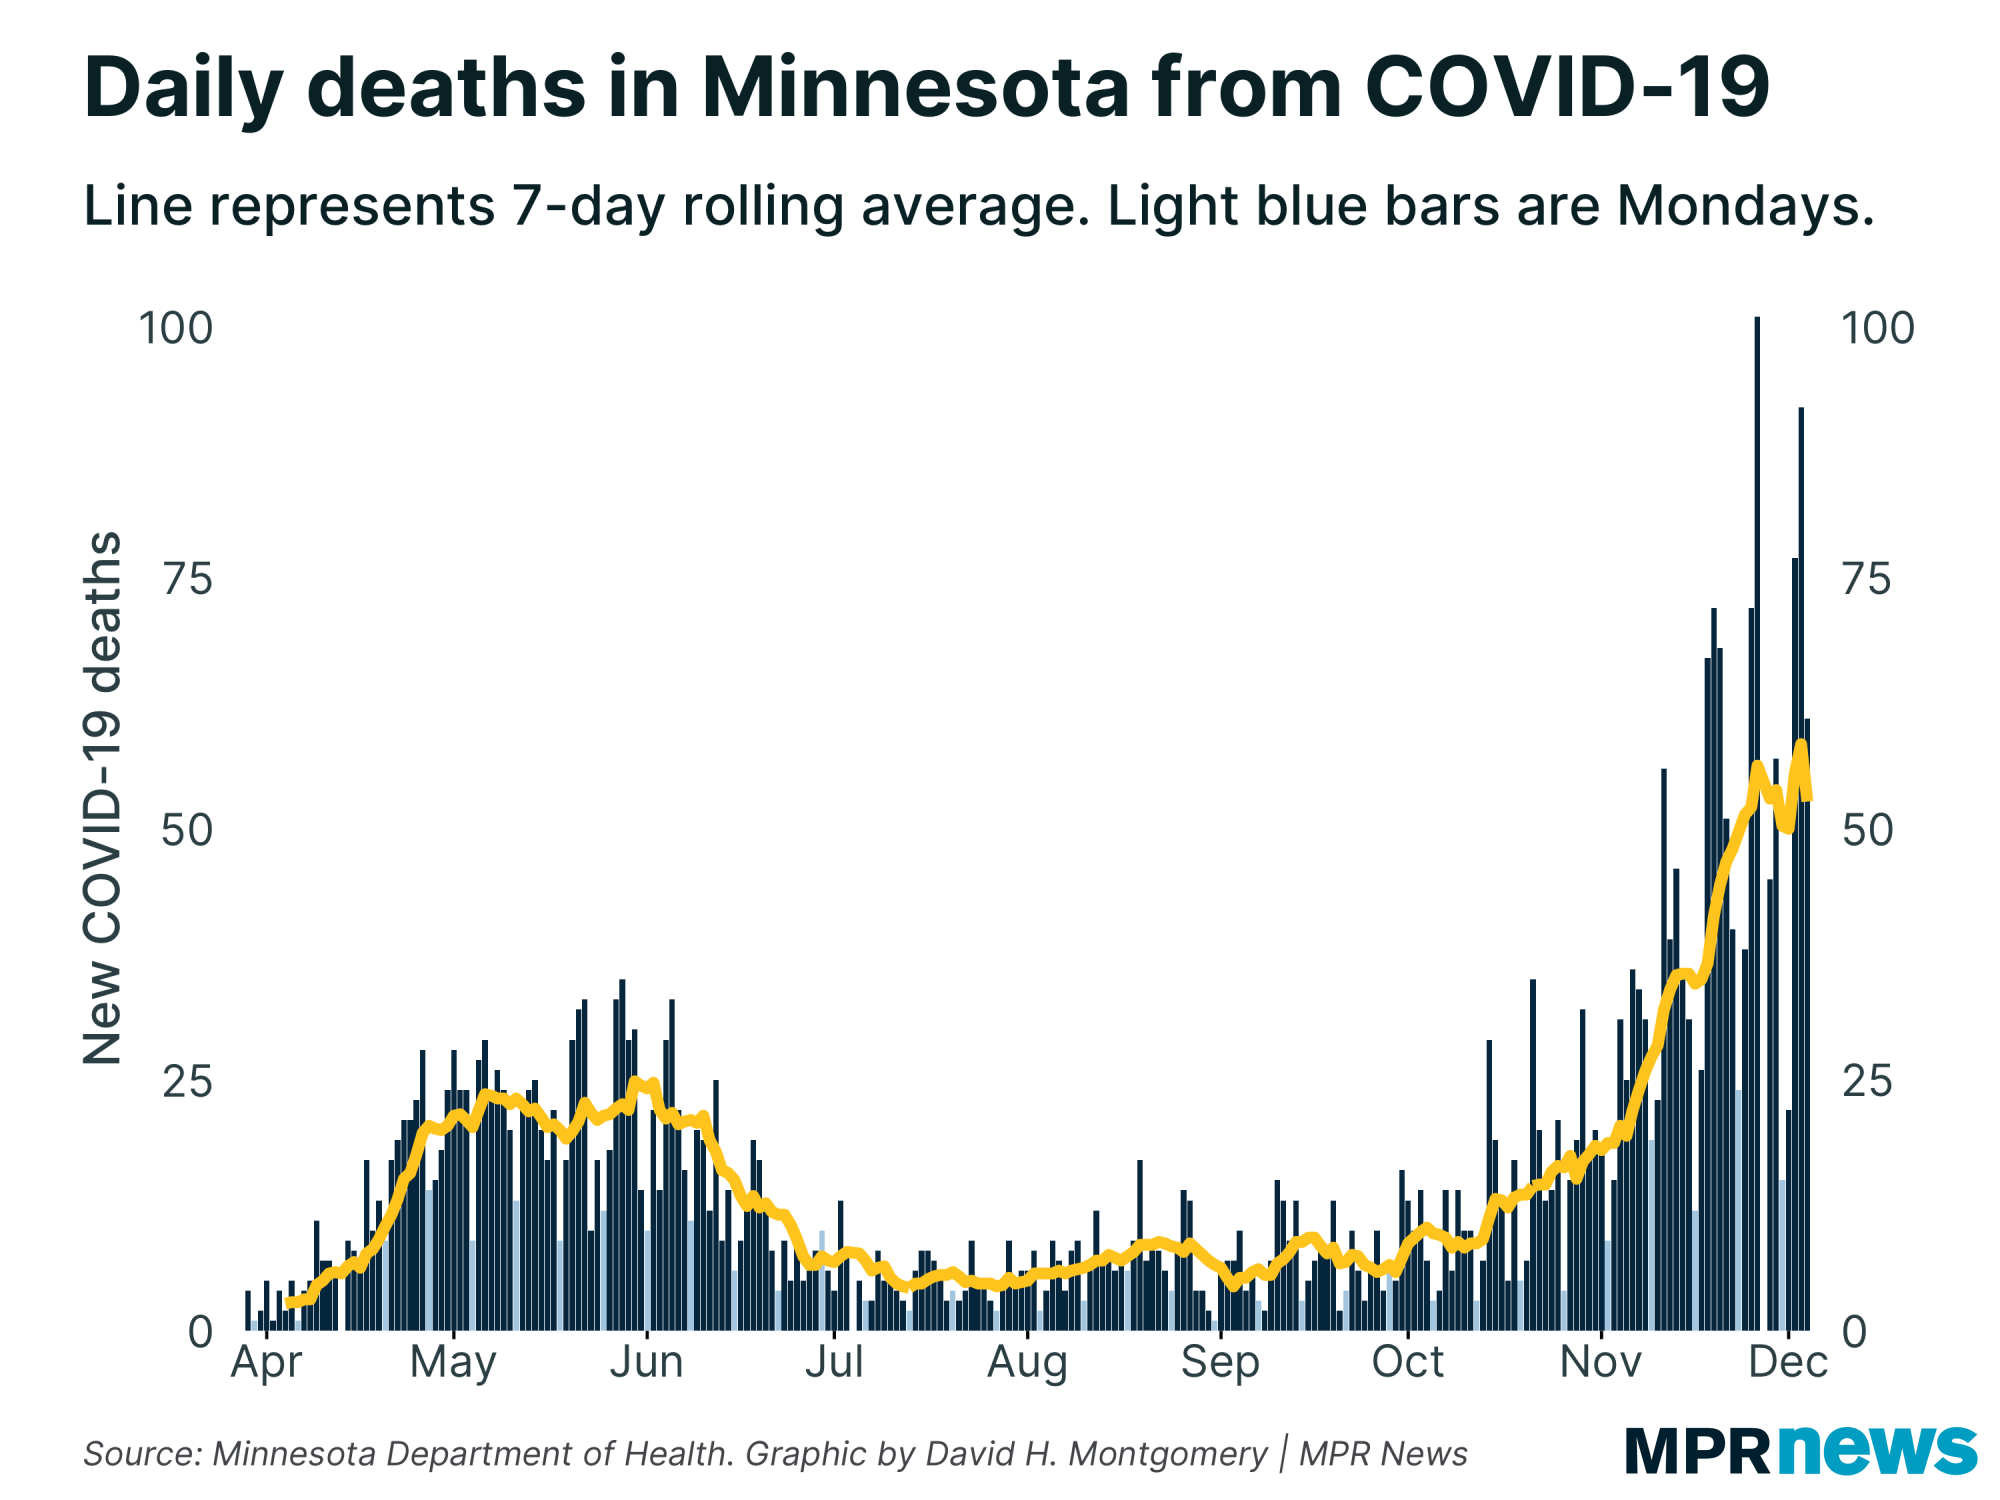 New COVID-19 related deaths reported in Minnesota each day